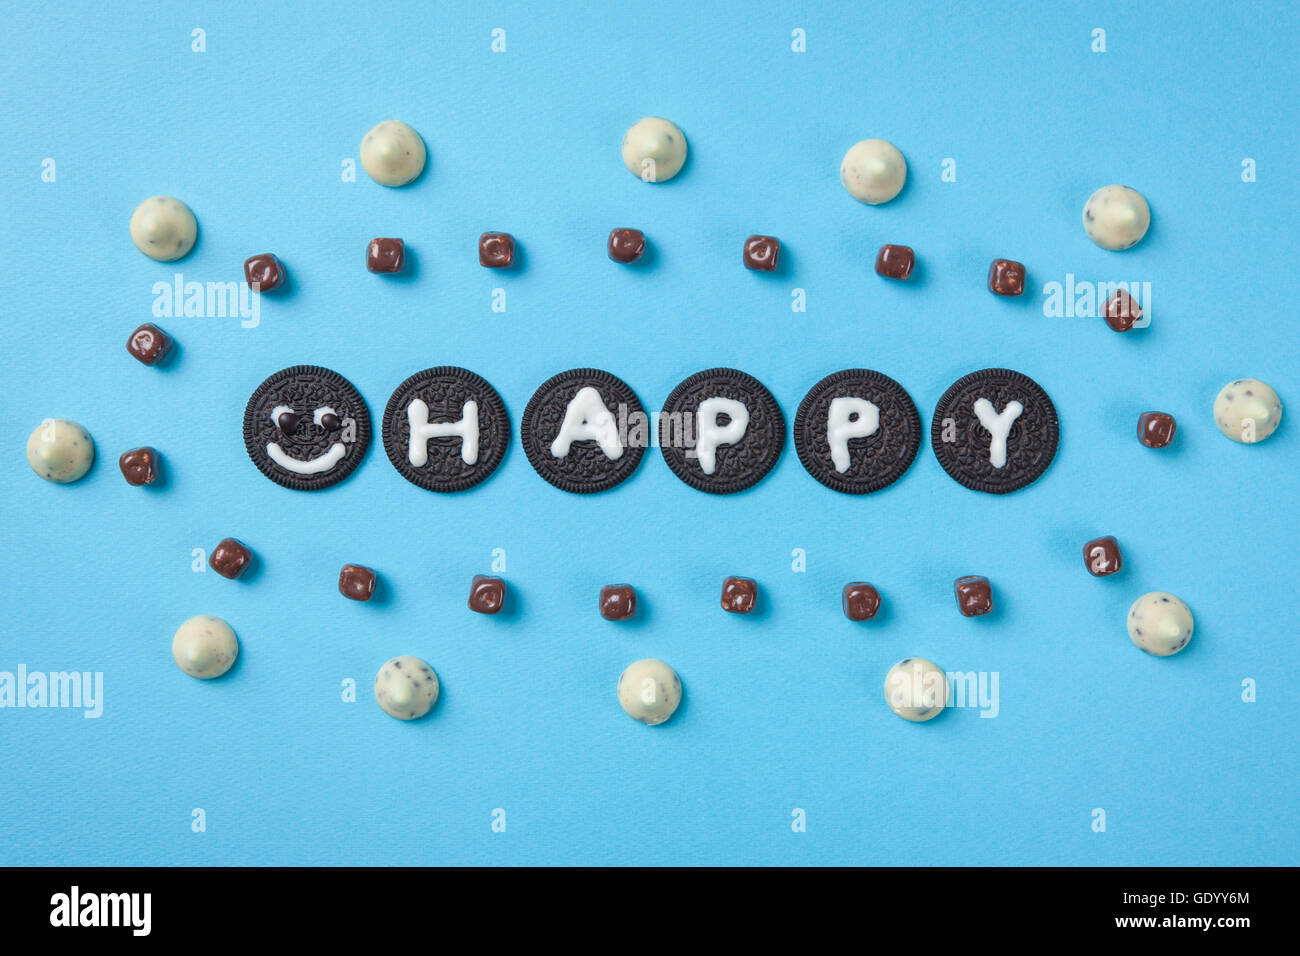 Typographical word of HAPPY made of chocolates and cookies Stock Photo